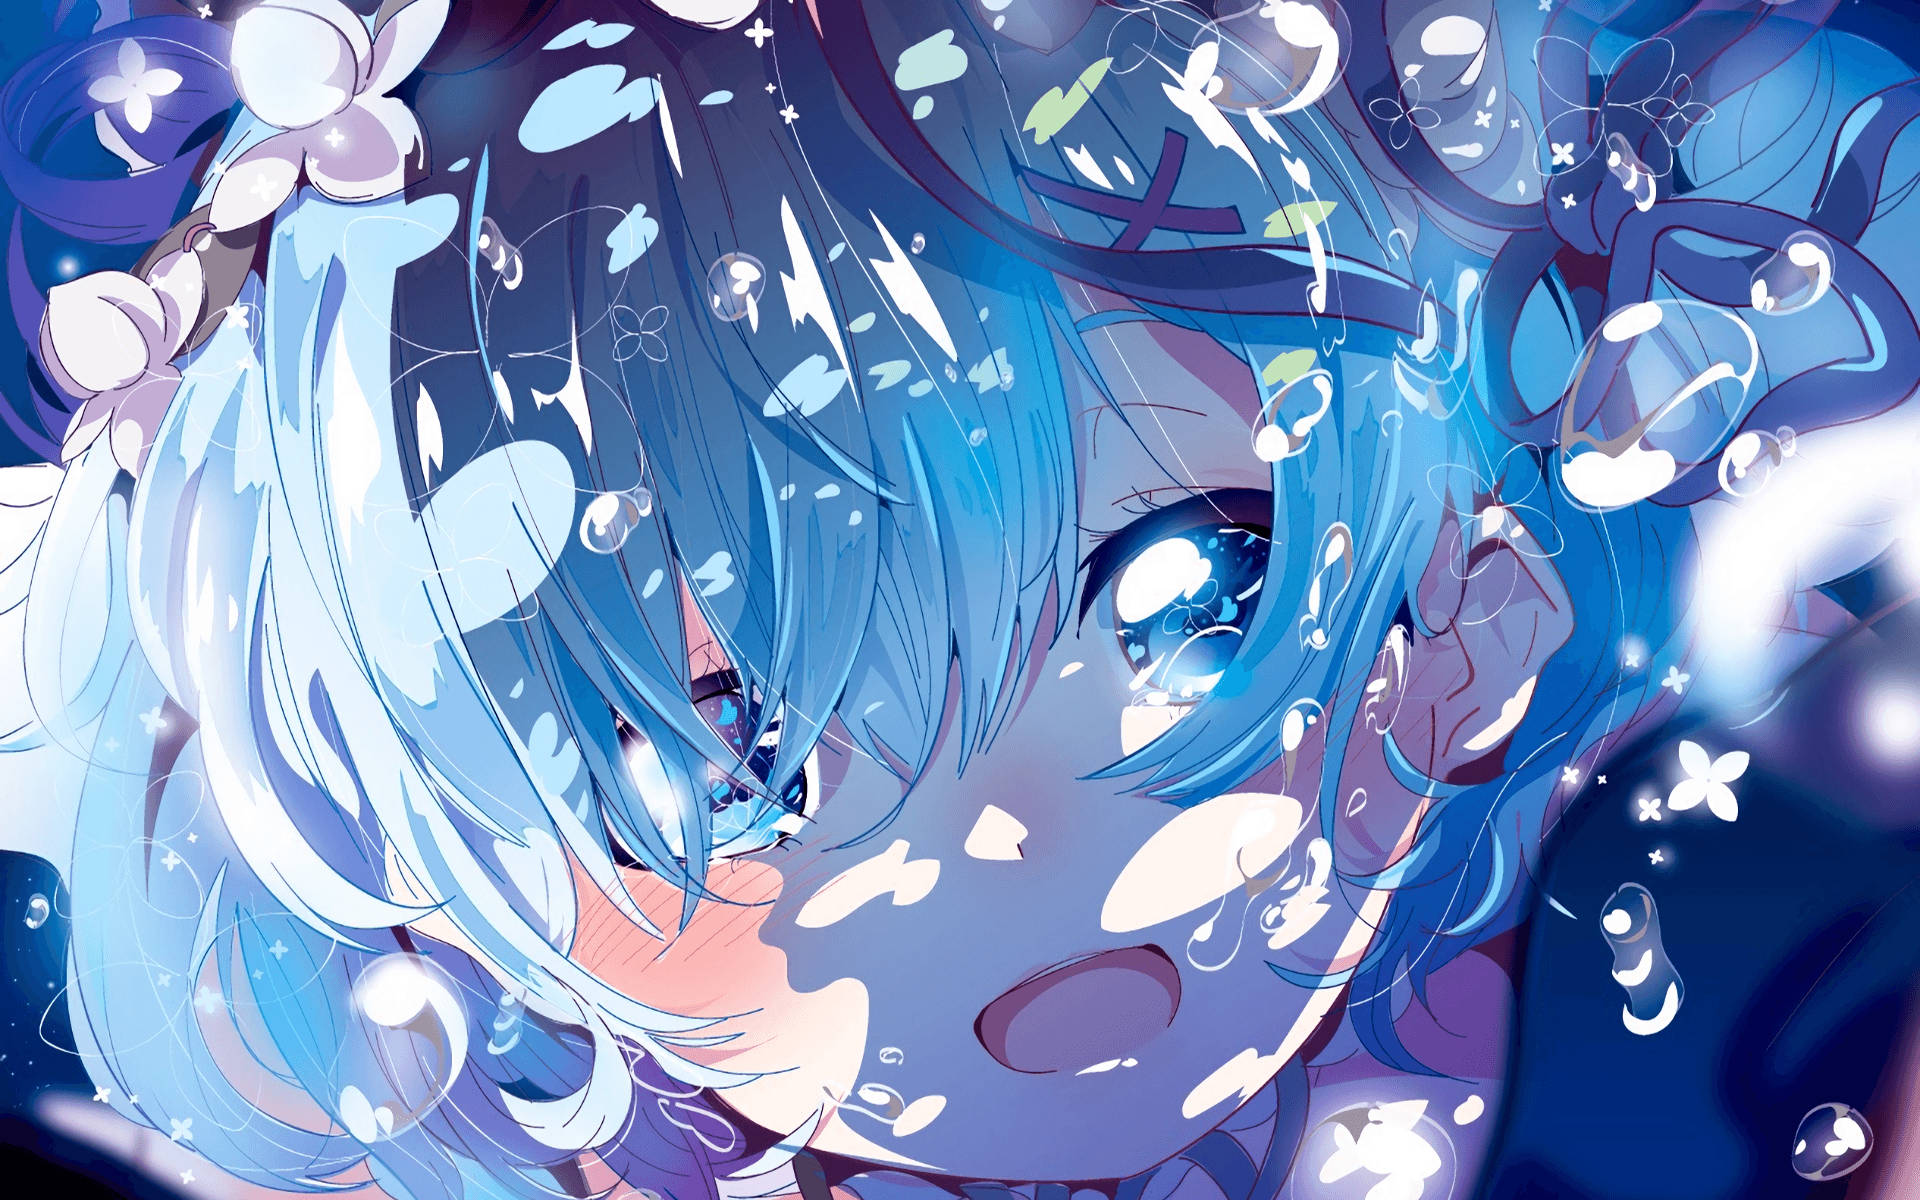 Discovering new dreams with Rem in Re Zero Wallpaper